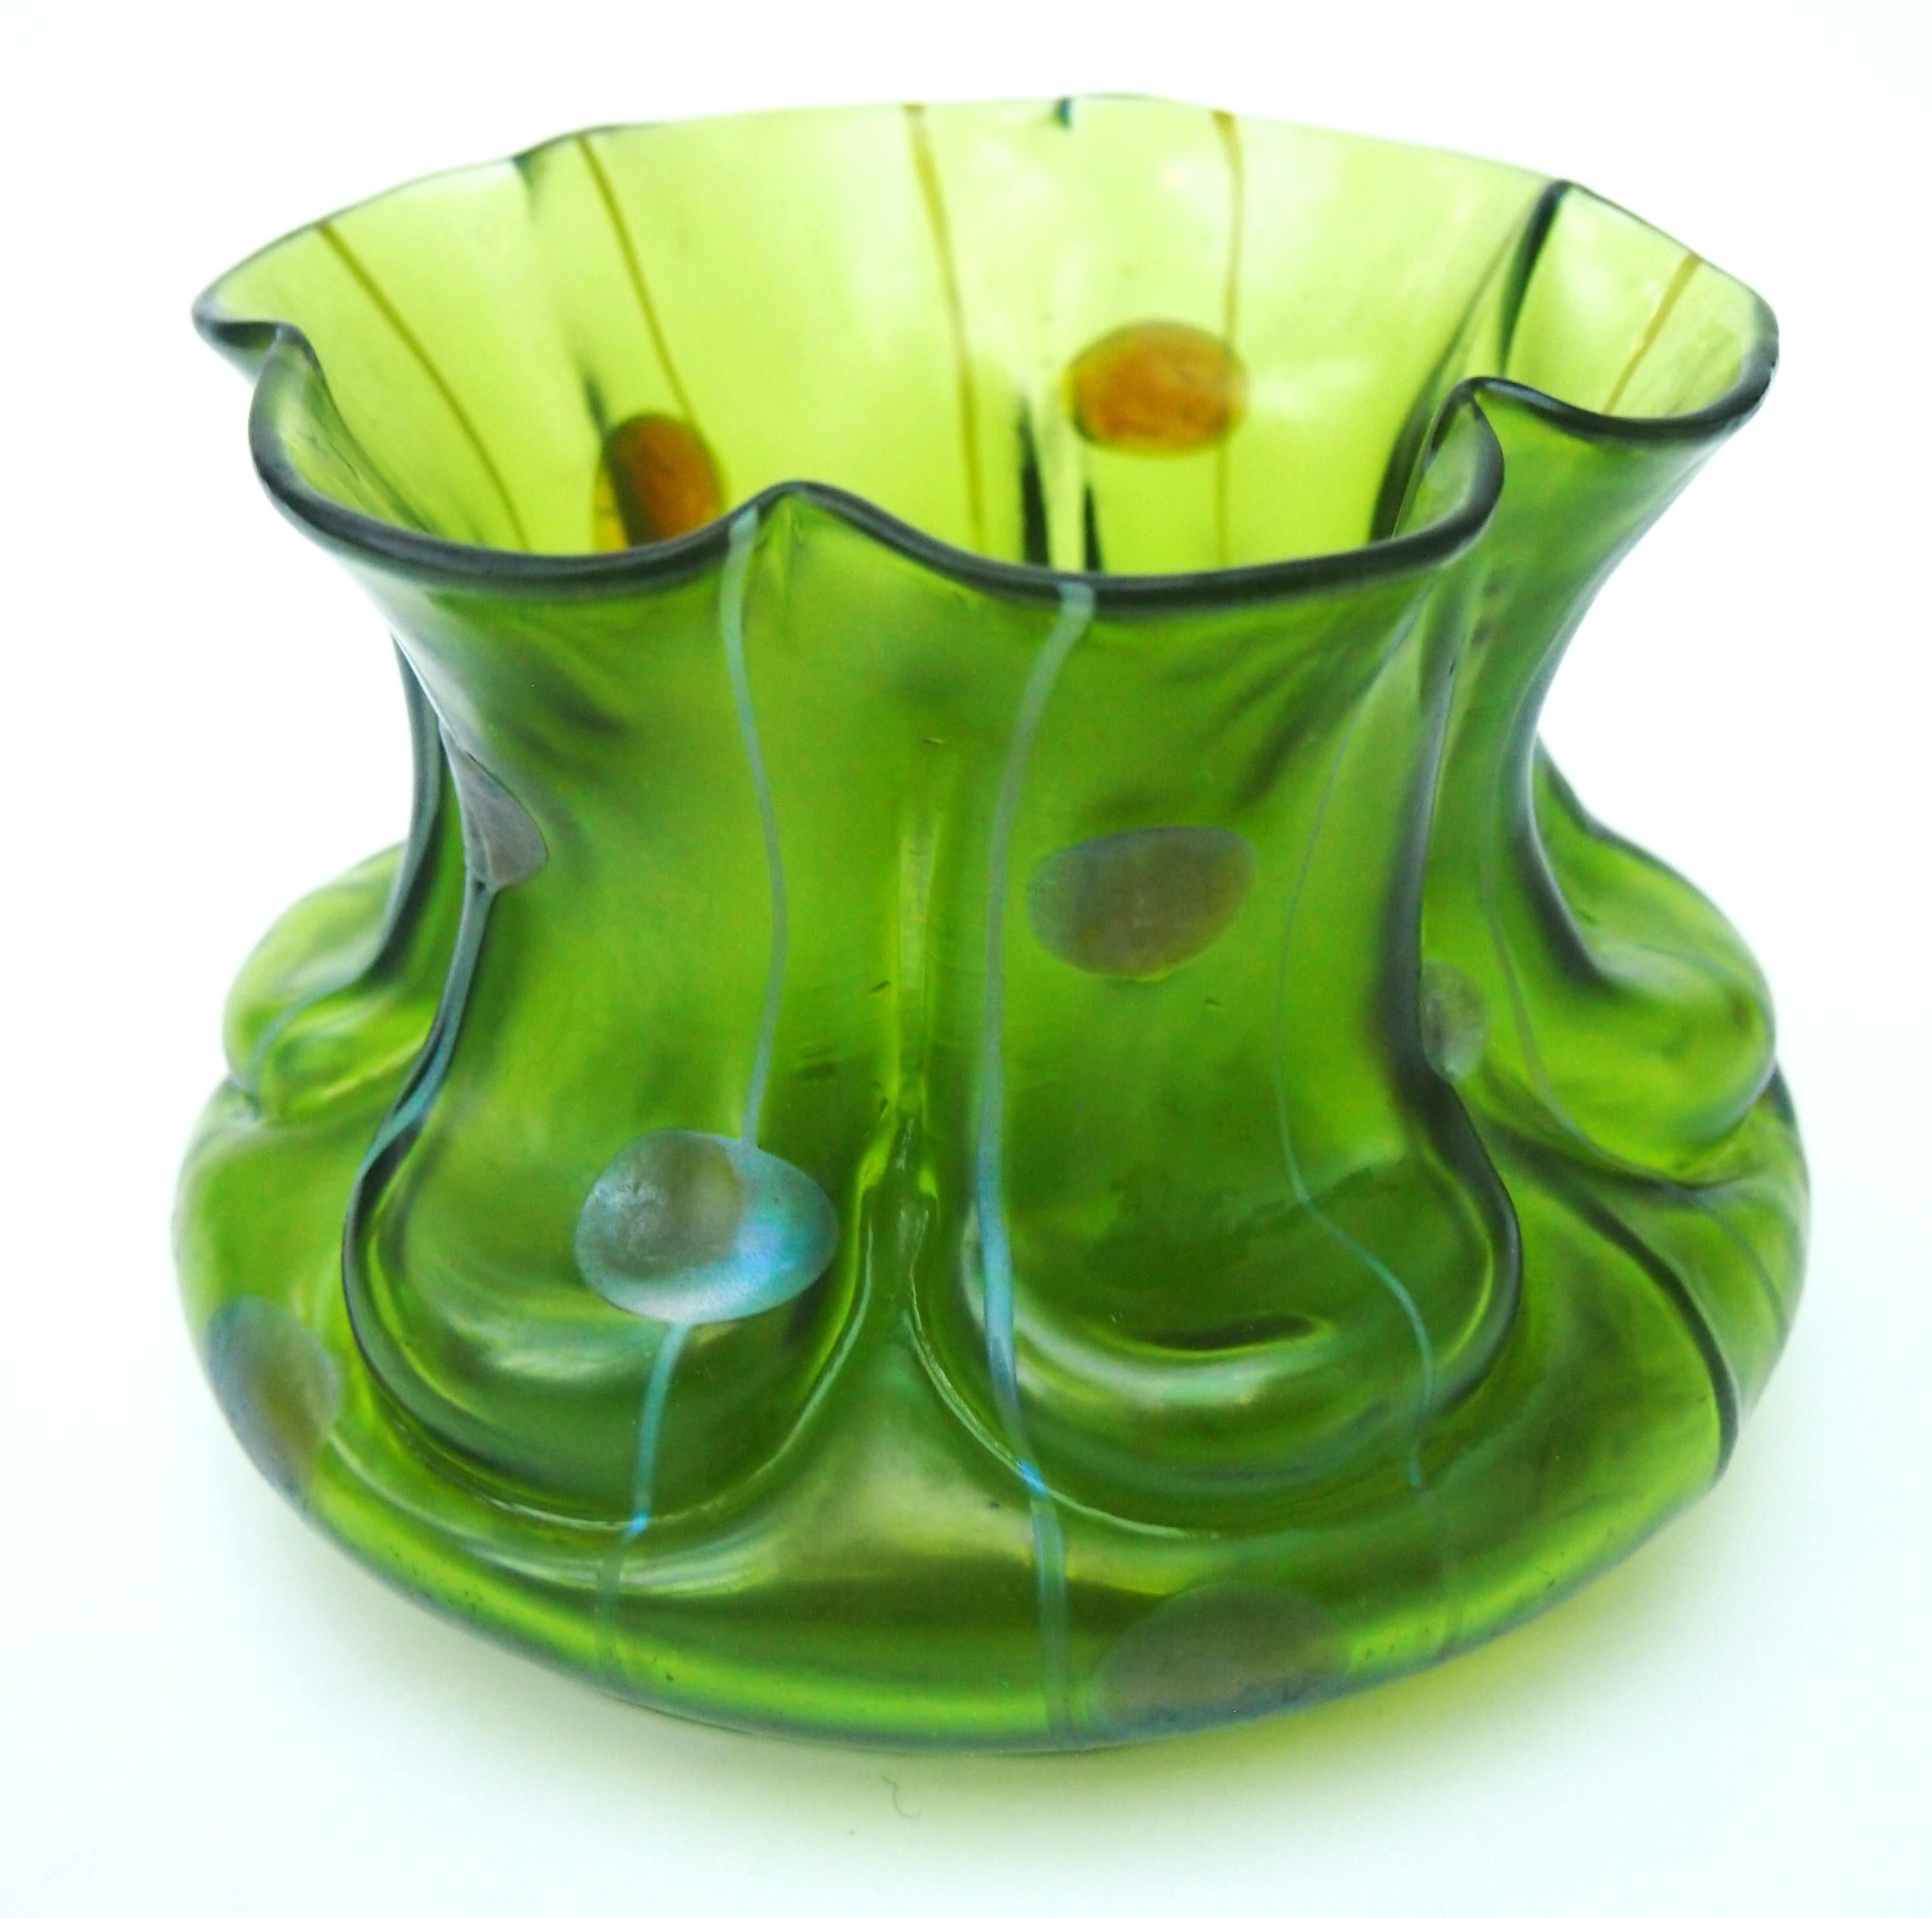 A classic Kralik Striefen and Flecken glass vase c1900, a deeply shaped vase with the classic pattern of repeated stripes and circular spots in silver over dark green glass. This particular pattern was later used by Kolo Moser and by Loetz - but